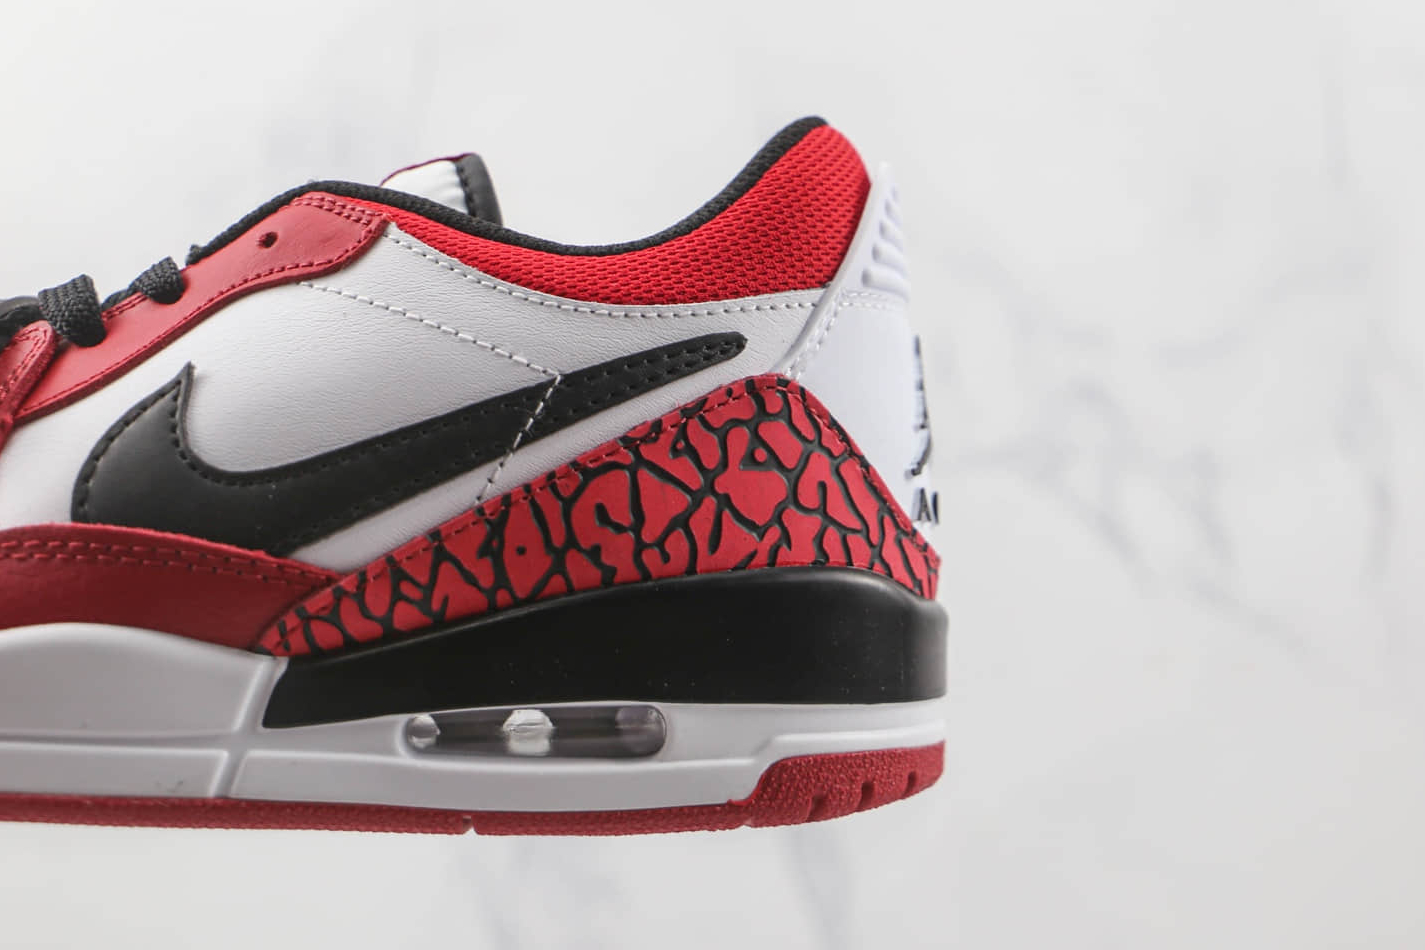 Jordan Legacy 312 Low 'Chicago Red' CD7069-116 - Shop Now for Authentic Sneakers!